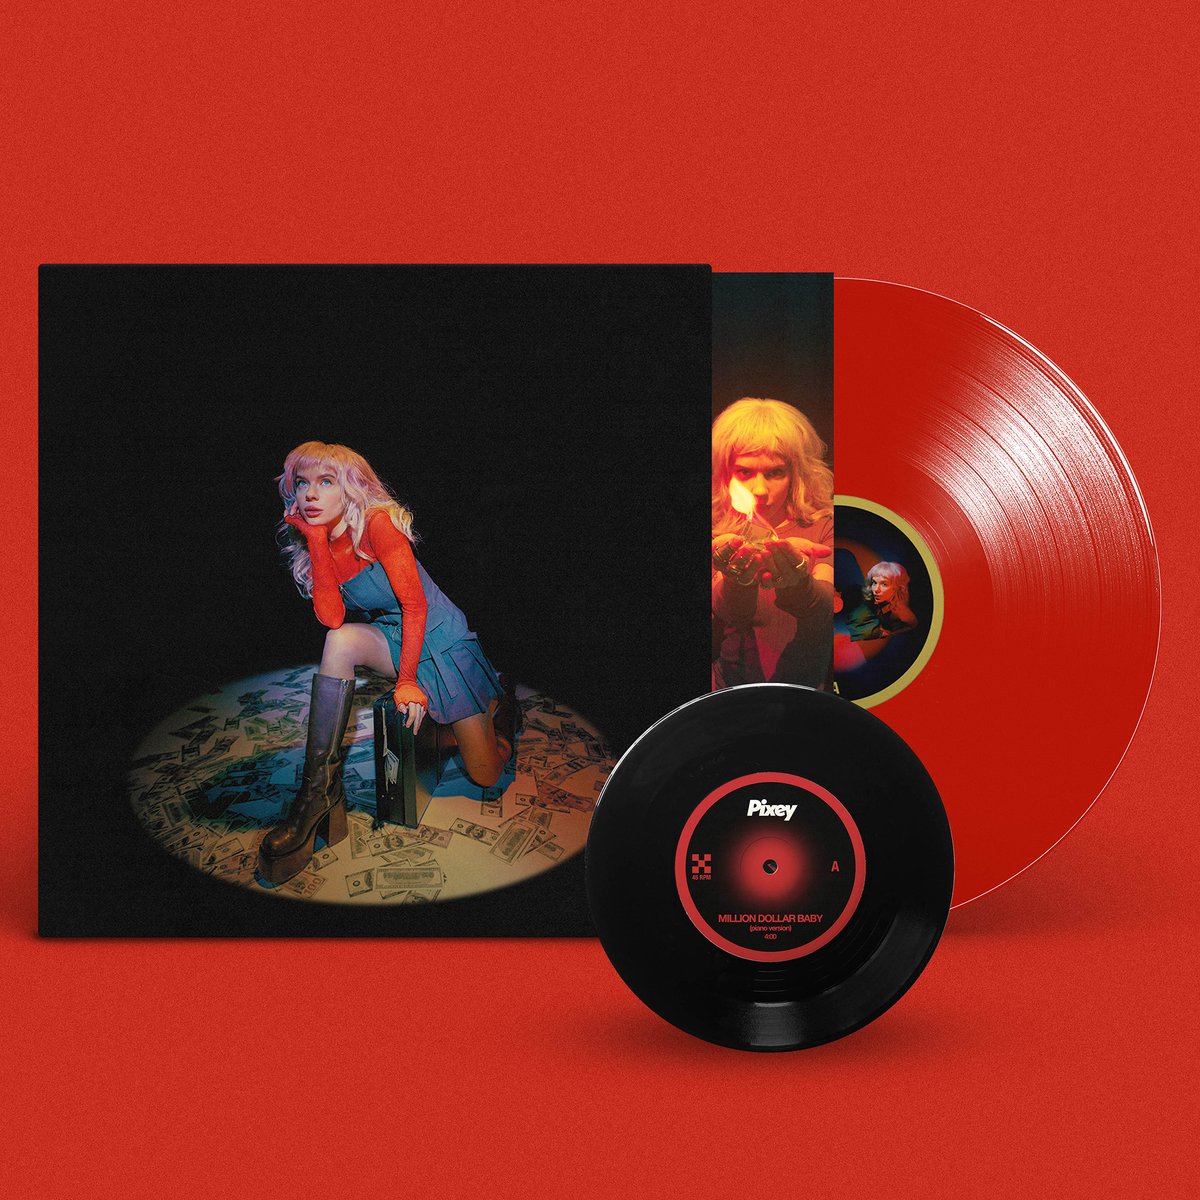 Million Dollar Baby is the dazzling new pop set from @pixeyofficial We worked with her and @ChessClubRecord to bring you a real nice @dinkededition! #dinkededition